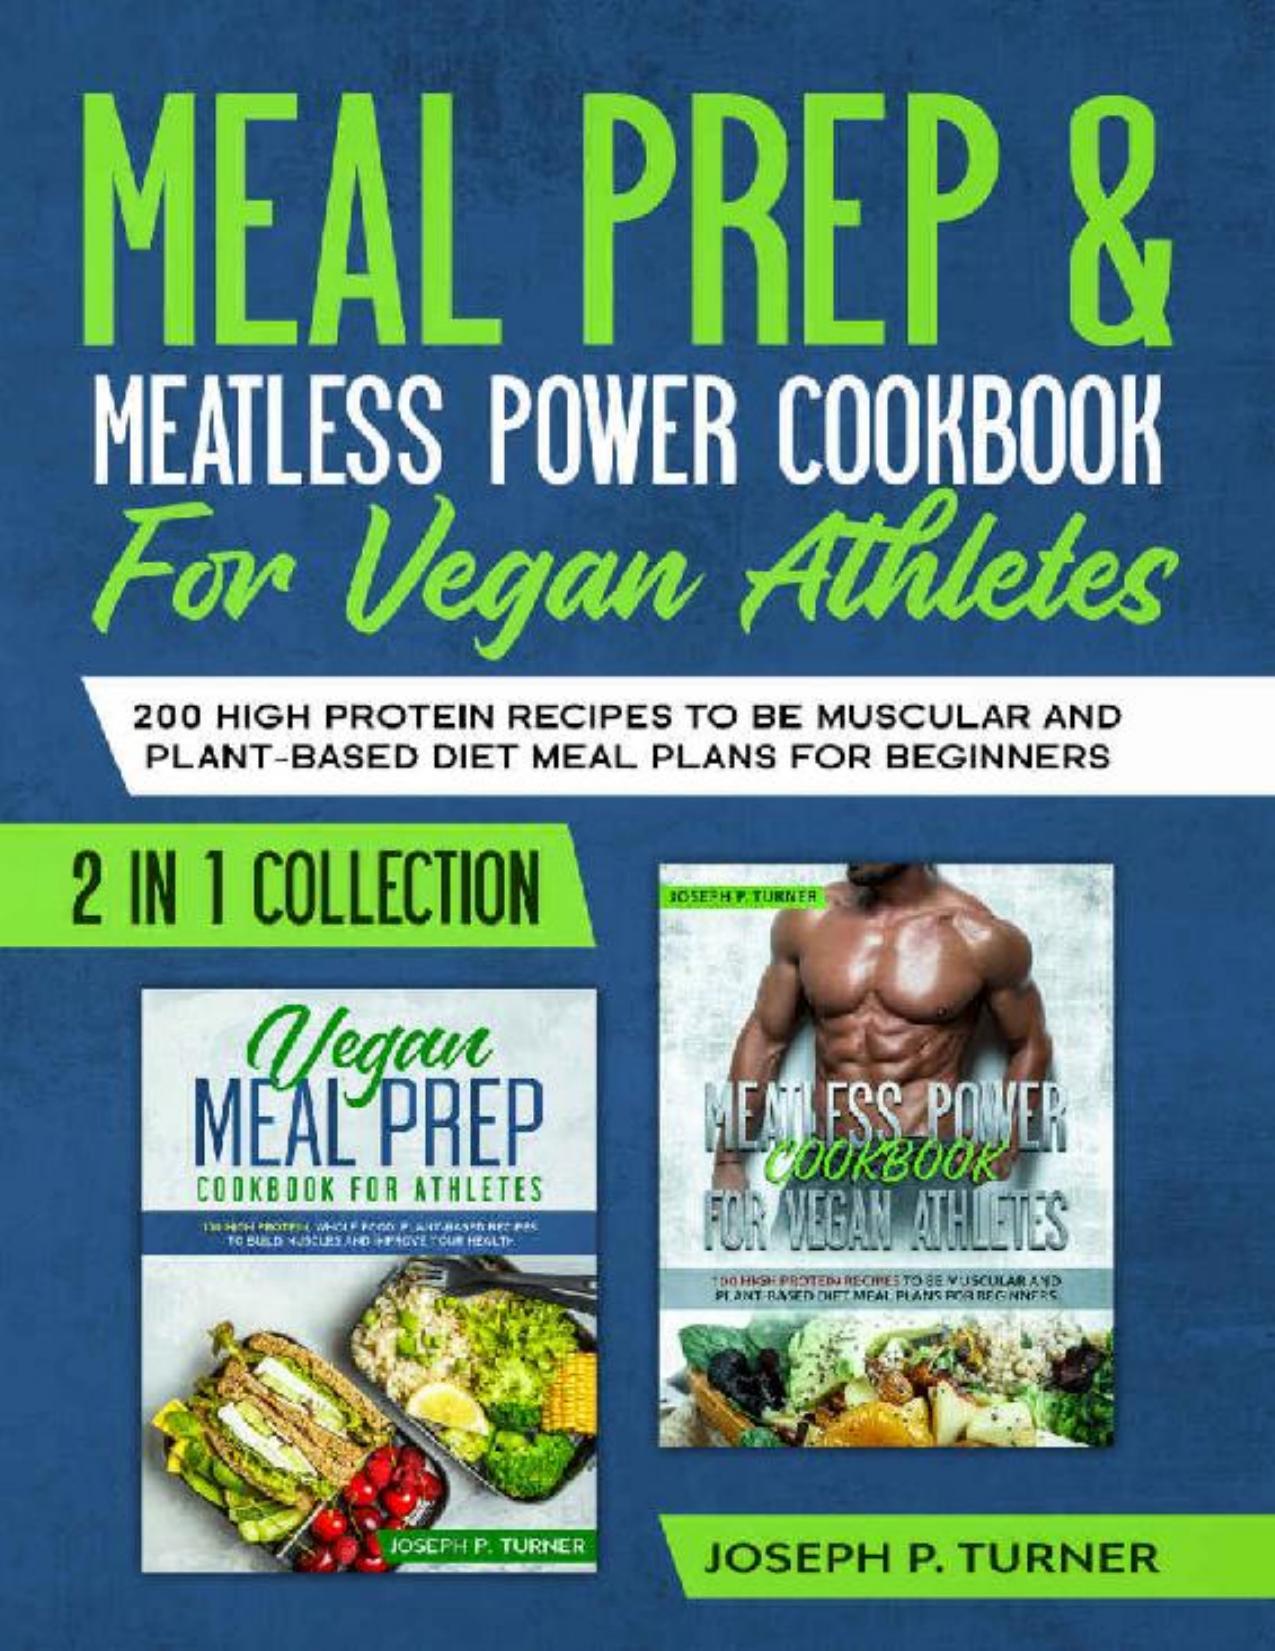 Meal prep & Meatless Power Cookbook For Vegan Athletes: 200 High Protein Recipes to be Muscular and Plant-Based Diet Meal Plans for Beginners (2 in 1 Collection with pictures) by Joseph P. Turner